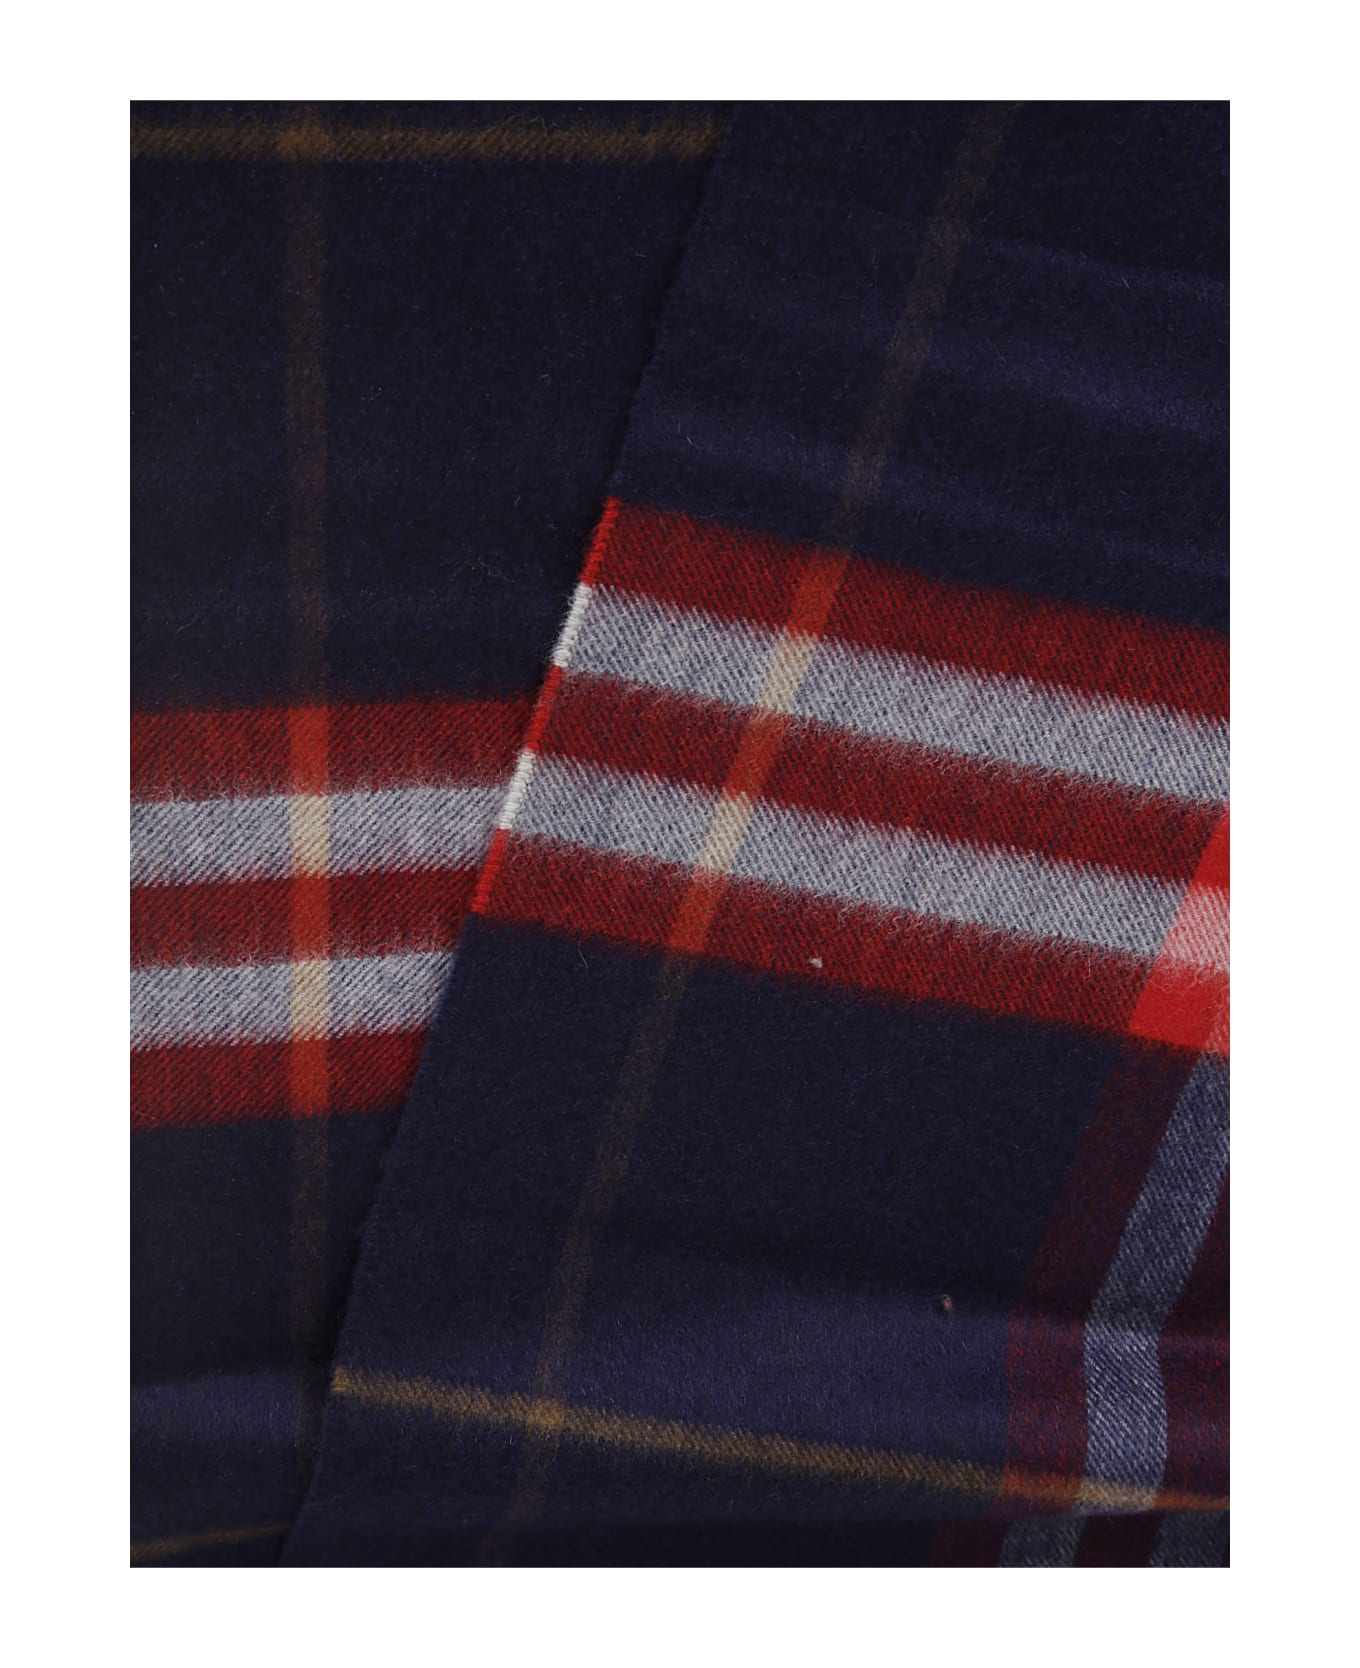 Burberry Check Scarf - Add to bag